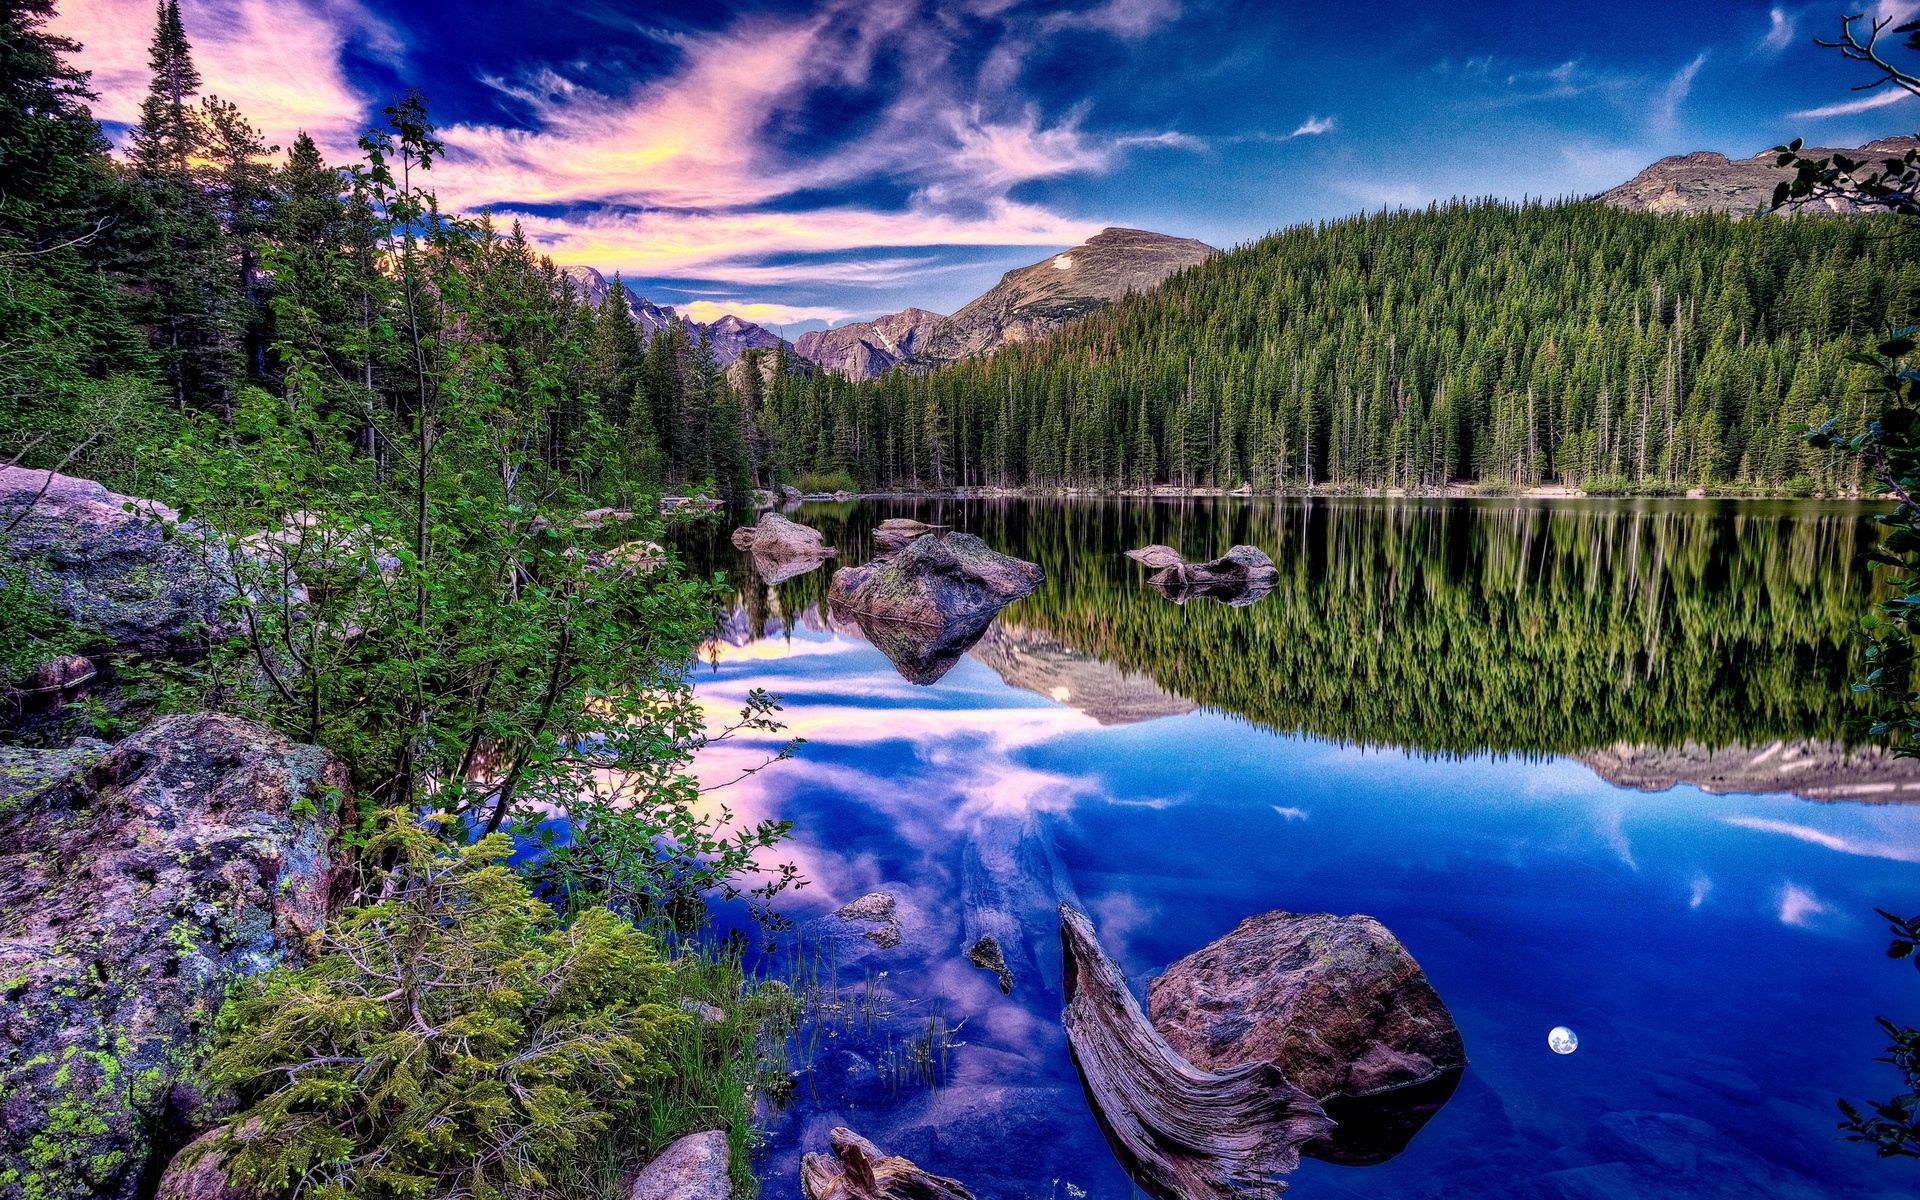 contrast, mountains, shore, clouds, brightly, nature, stones, sky, lake, reflection, bank, forest, mirror, snag 32K